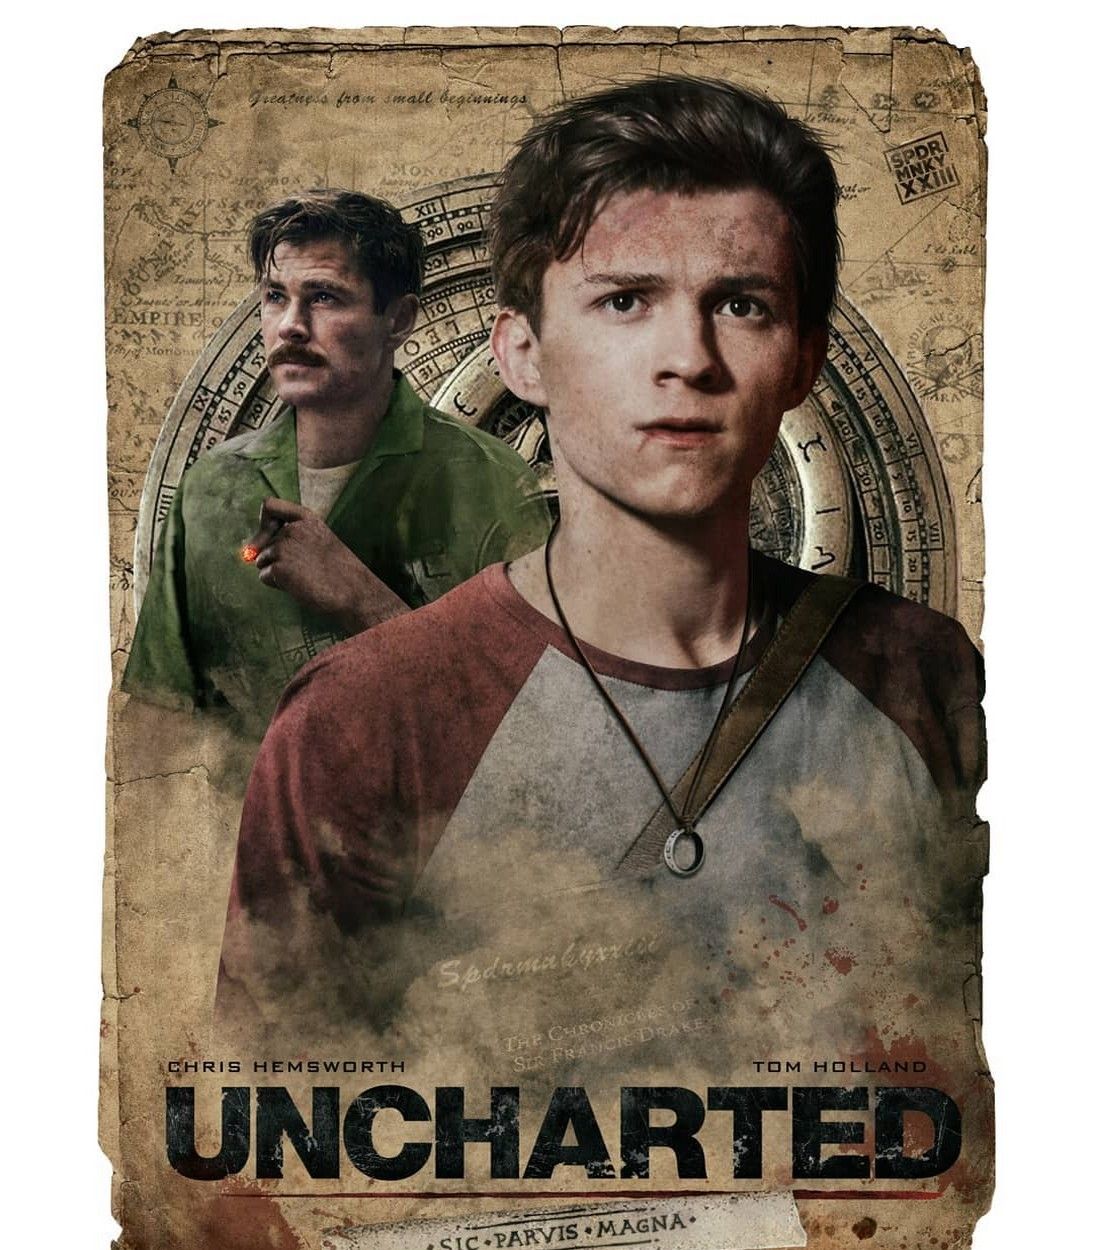 Uncharted Chris Hemsworth as Sully Fan poster with Tom Holland as Nathan Drake